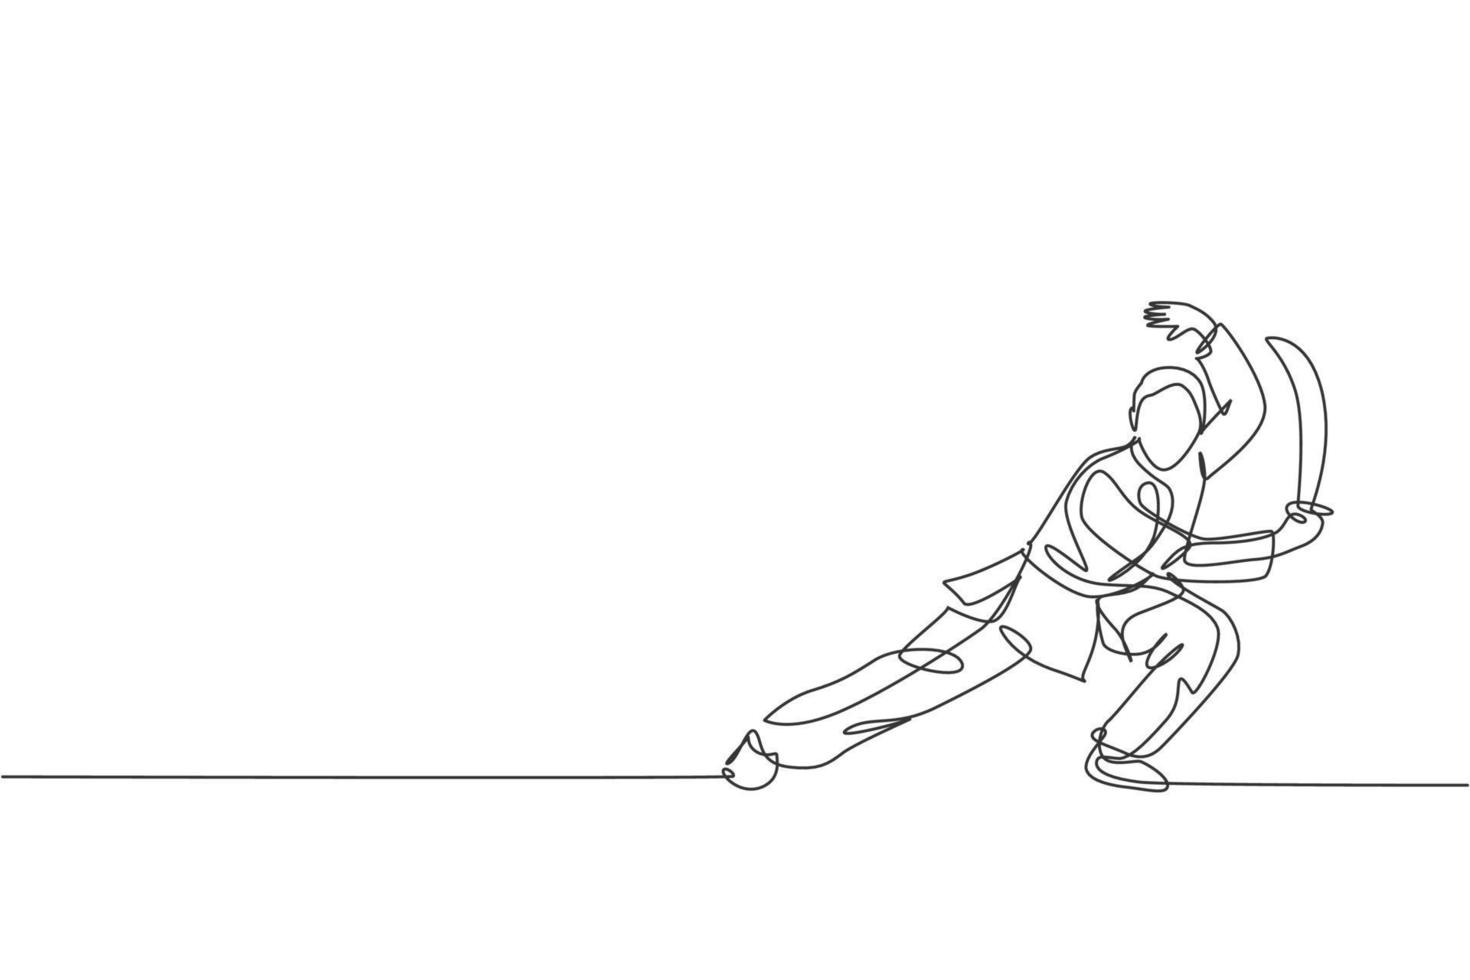 One continuous line drawing of young wushu master man, kung fu warrior in kimono with sword on training. Martial art sport contest concept. Dynamic single line draw design vector graphic illustration